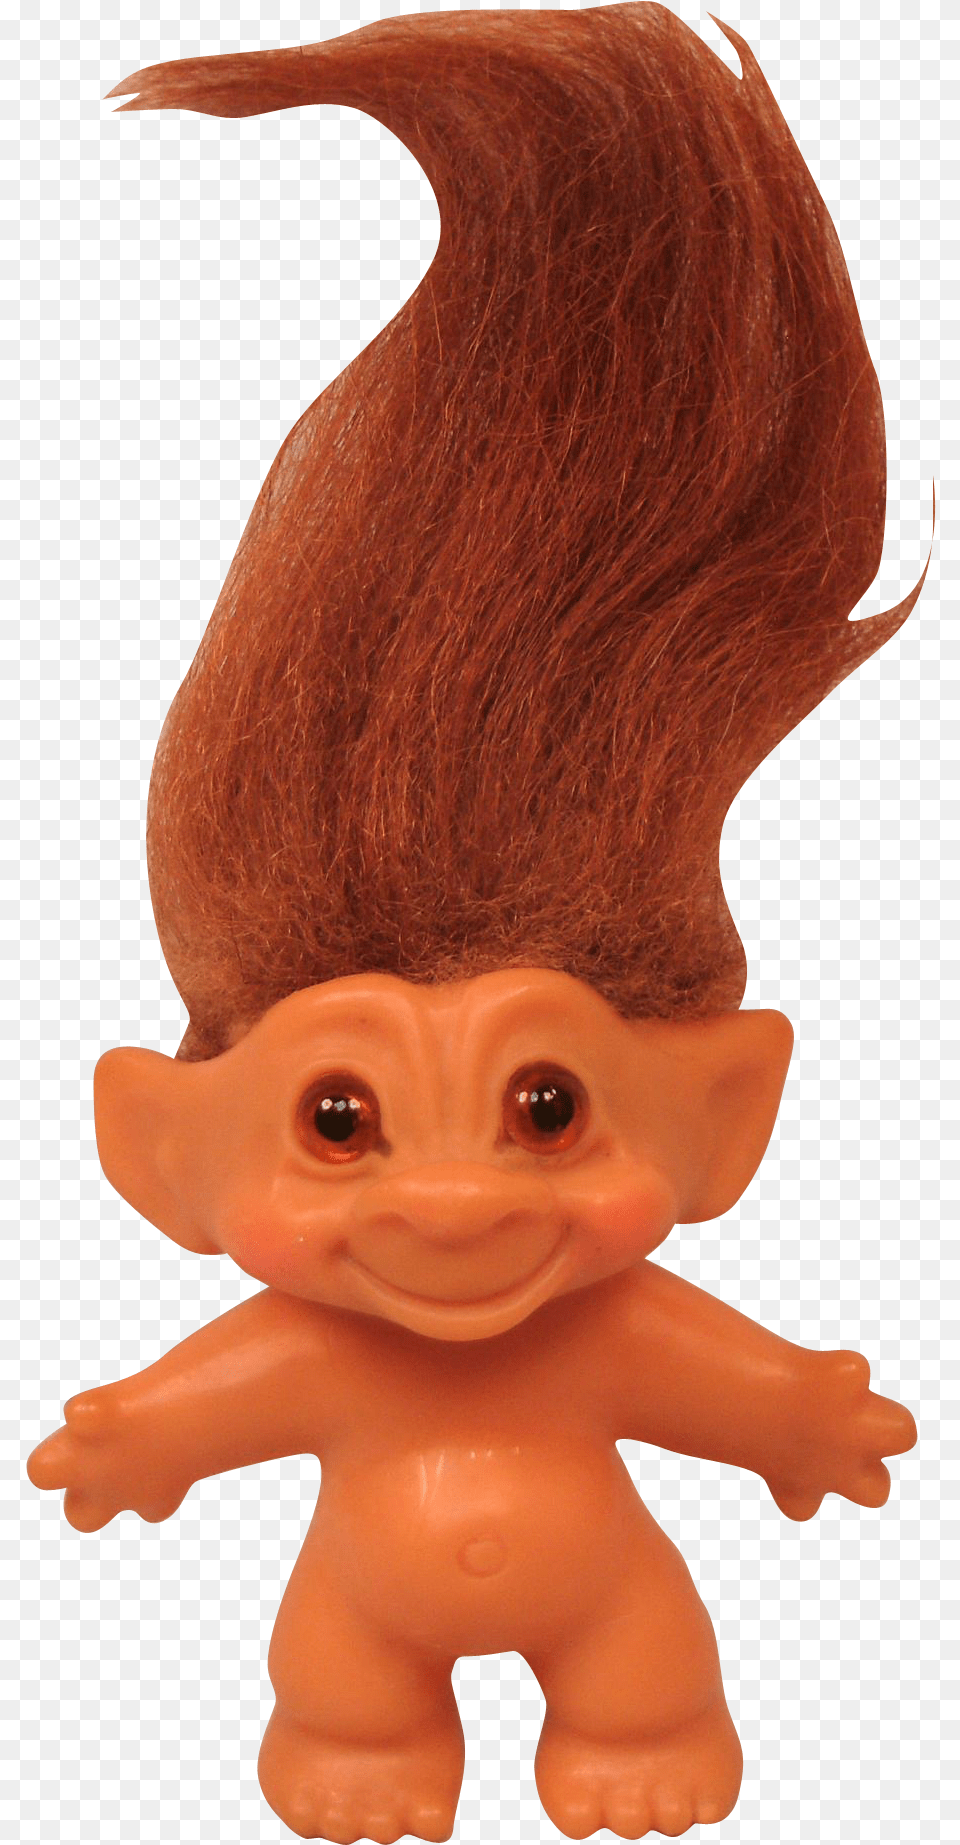 Troll Doll Trolls Toy Troll Doll, Figurine, Baby, Person, Face Png Image